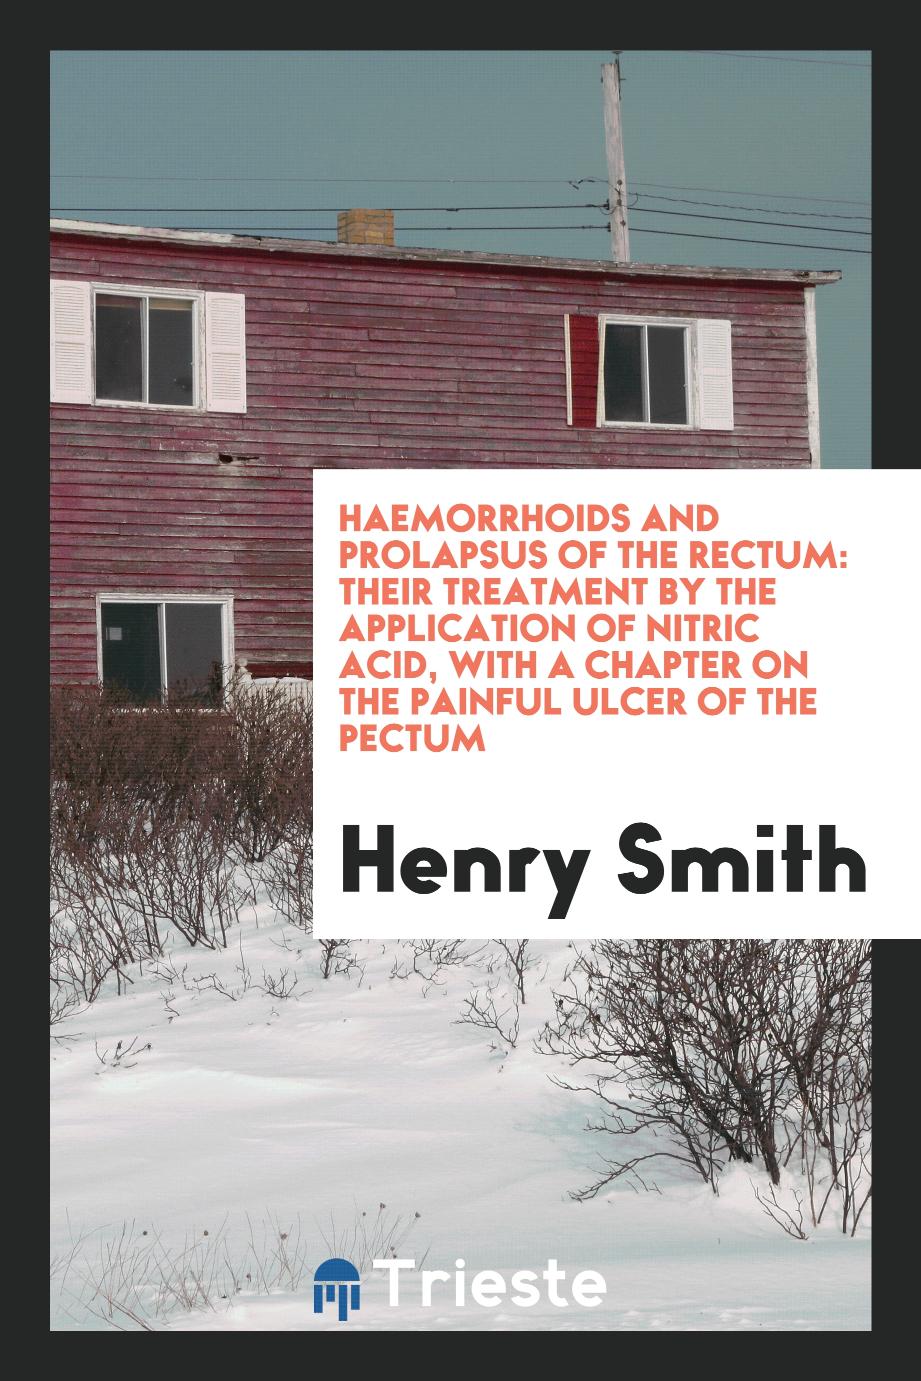 Haemorrhoids and Prolapsus of the Rectum: Their Treatment by the Application of Nitric Acid, with a Chapter on the Painful Ulcer of the Pectum